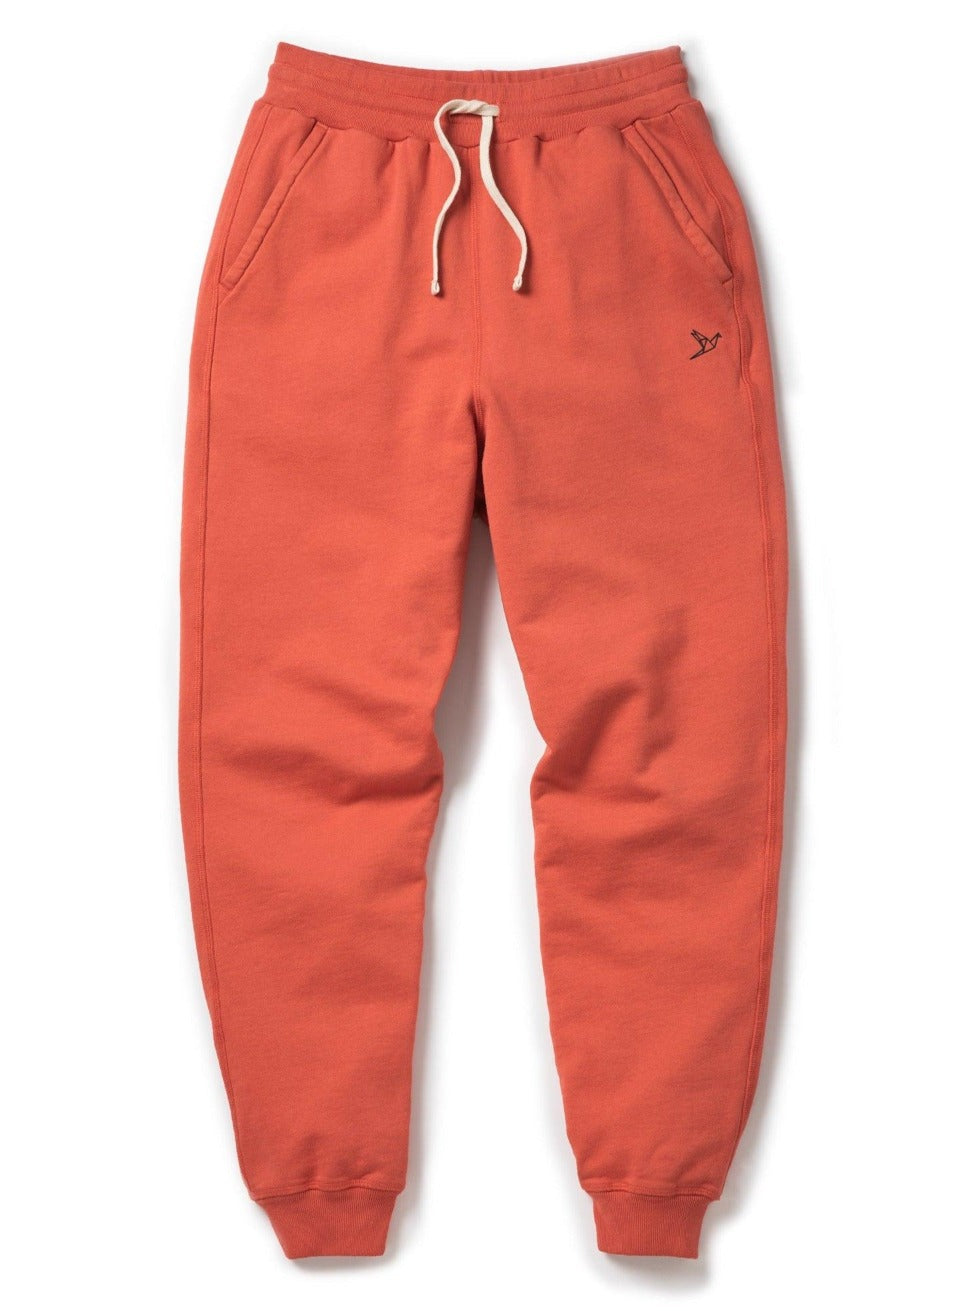 Women's Sweatpants - Coral - ORILABO Project